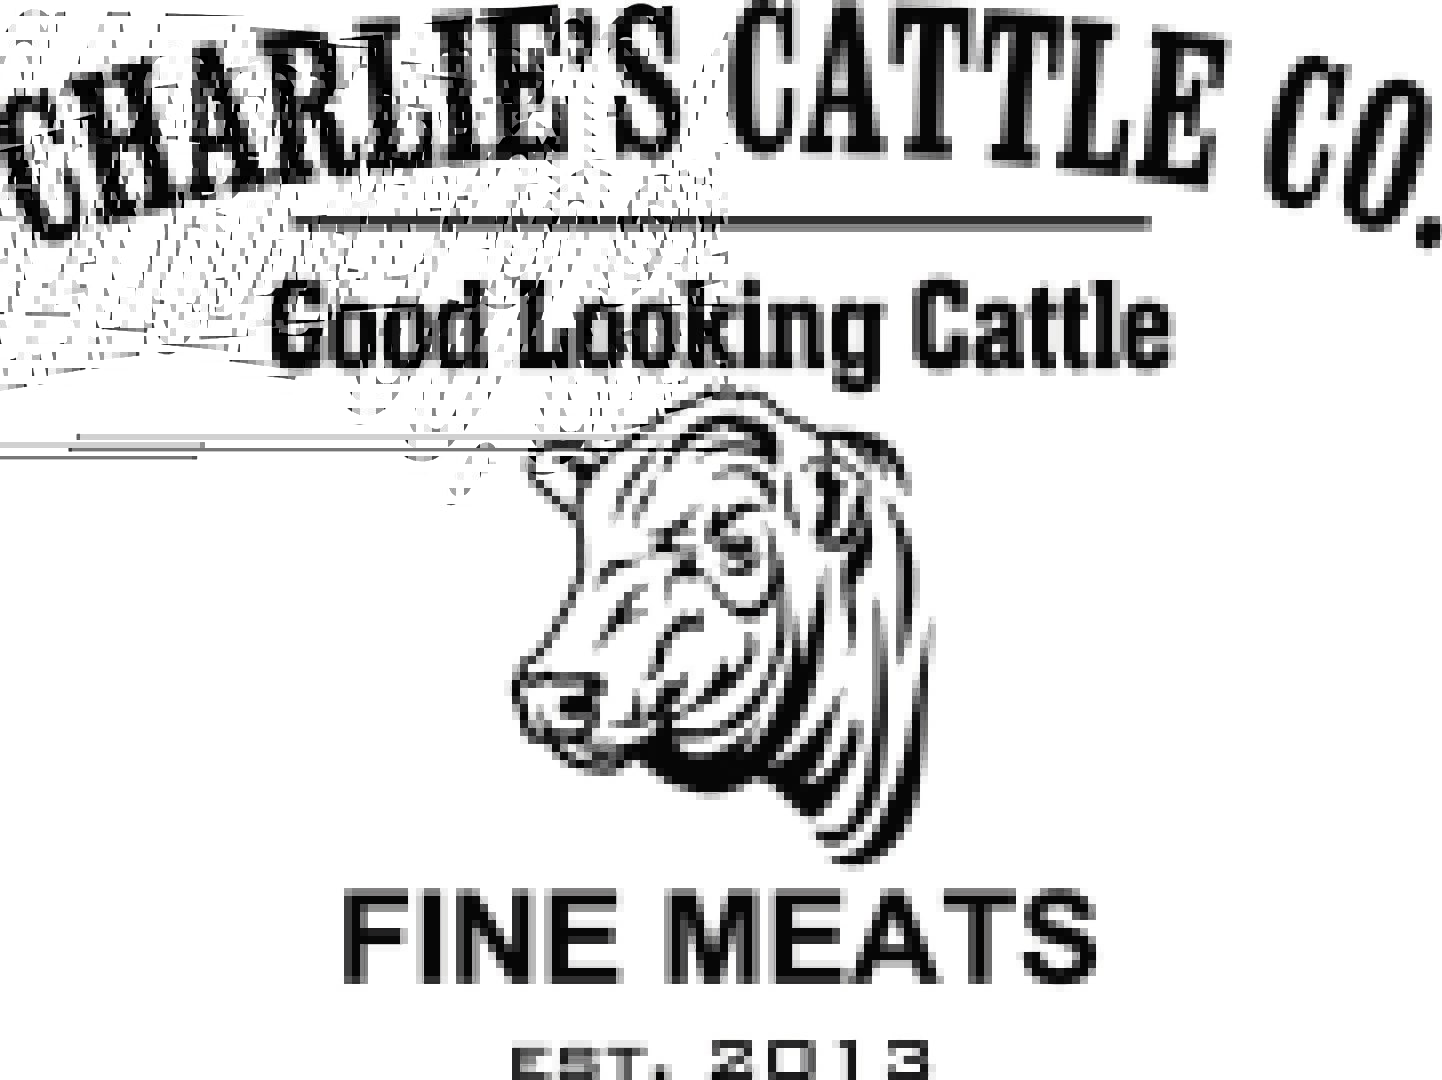 A black and white image of an animal with the words " arlie 's cattle, good looking cattle fine meats."